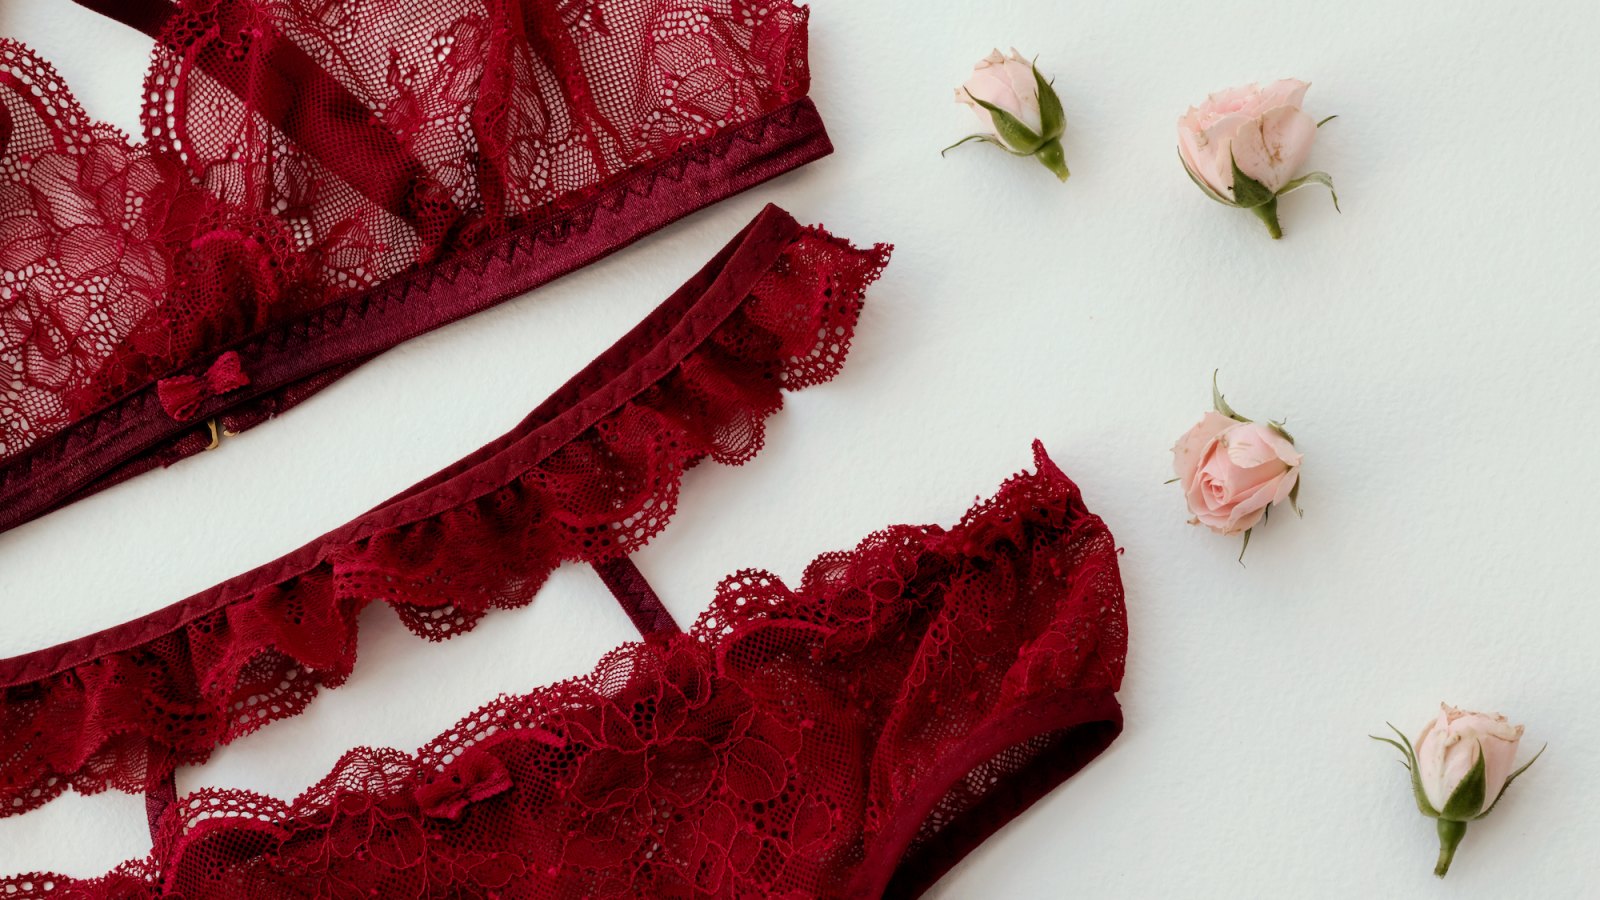 Embroidery Lace Flowers French Lingerie Set Sexy Push up -  Israel